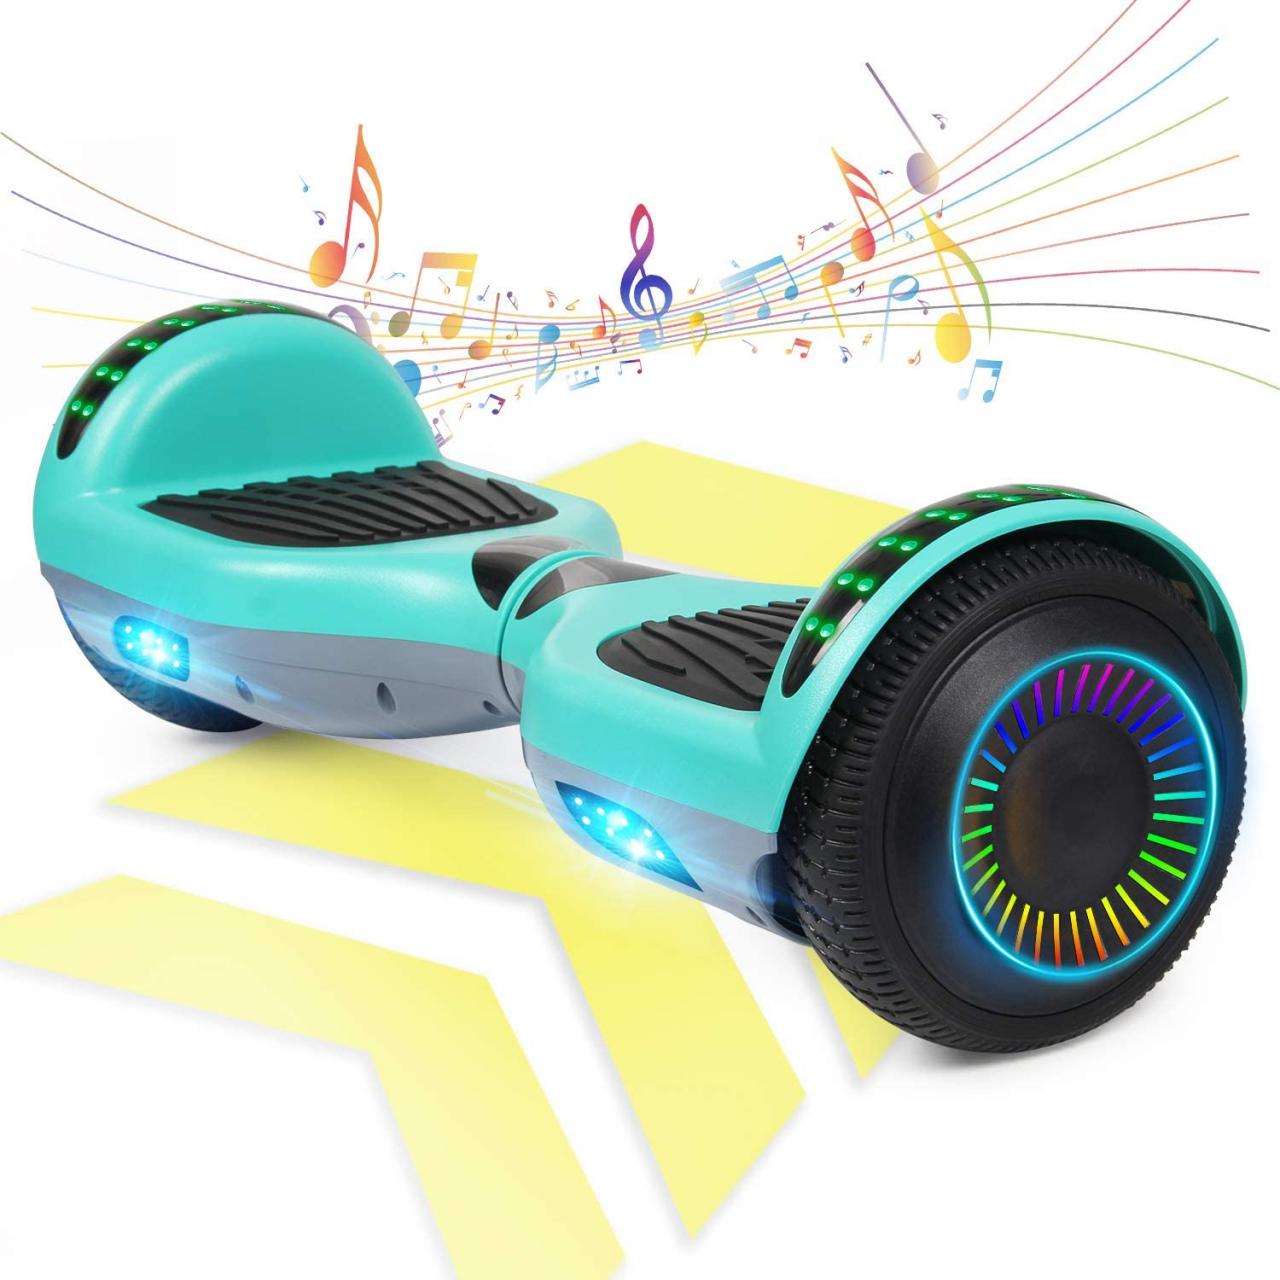 Buy FLYING-ANT Hoverboard for Kids, Hoverboard with Bluetooth Speaker Self  Balancing Scooter 6.5 Hover Board UL2272 Certified Perfect for Adult Kids  Online in Hong Kong. B08FY3BV4L